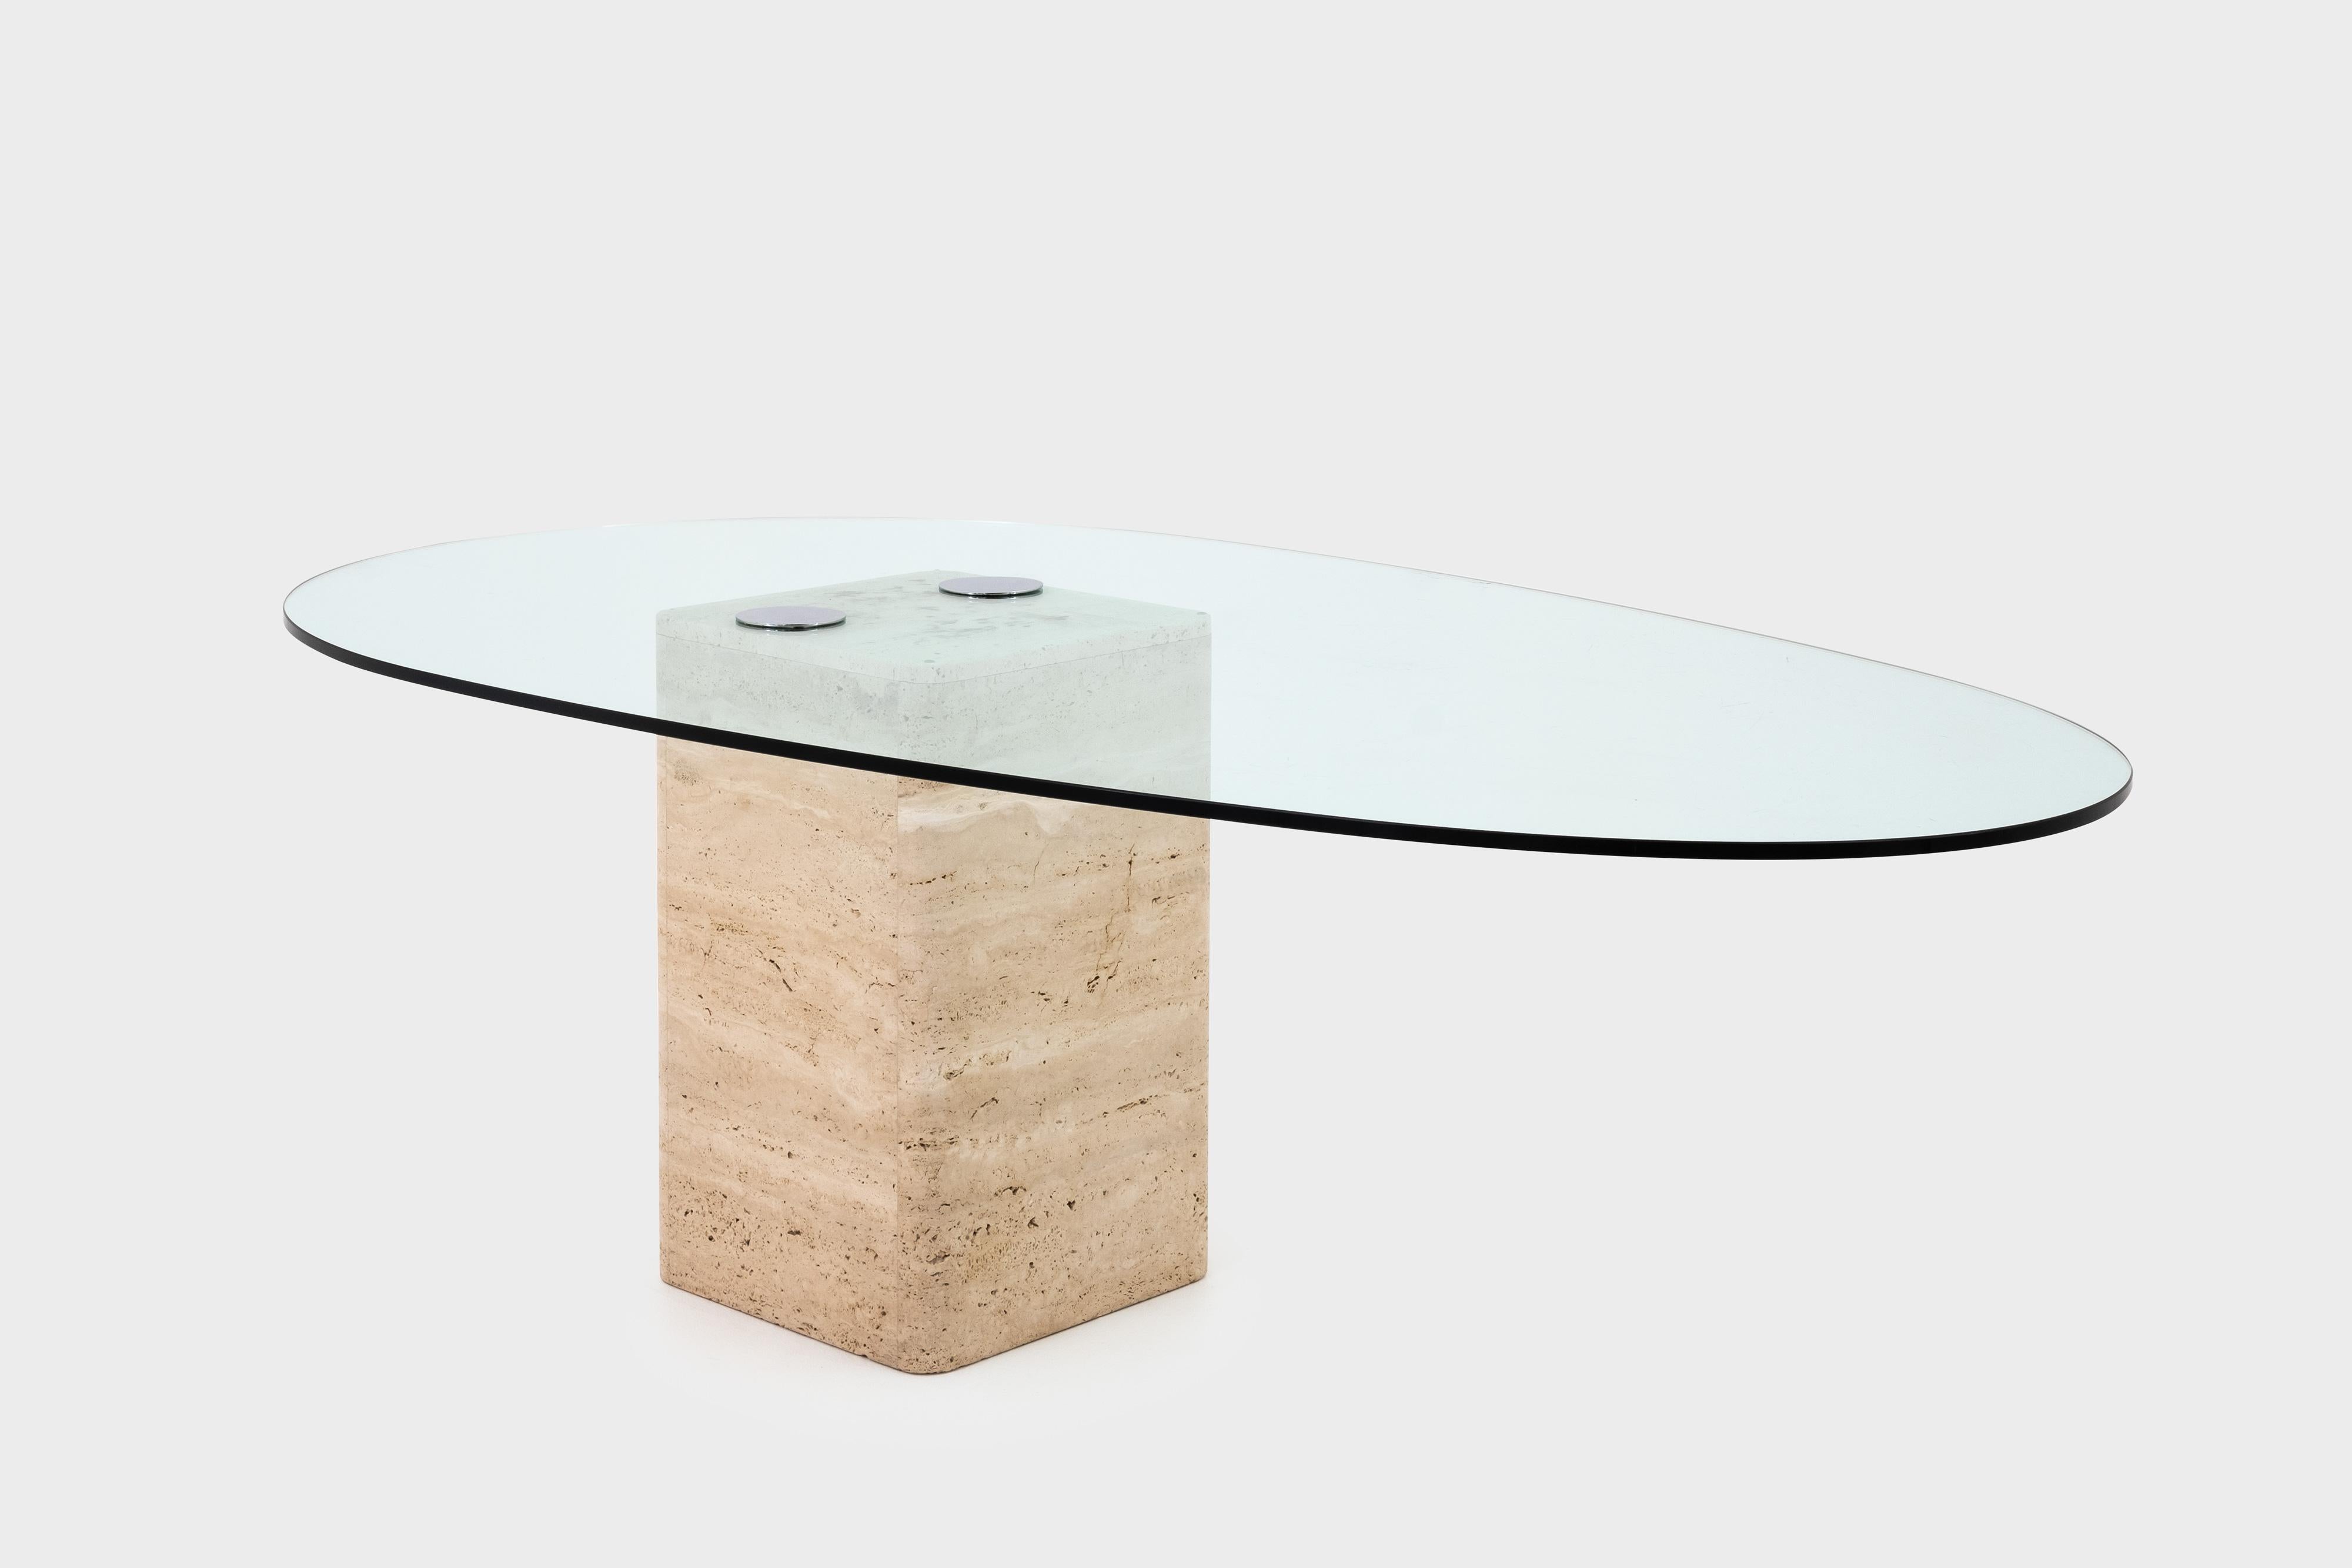 Stunning dining table by Sergio and Giorgio Saporiti, Italy, circa 1970. The table has a heavy cubic base made of travertine with a 1.5 cm egg-shaped glass top. The hardened glass top is fixed to the base with two chrome disks which are screwed into